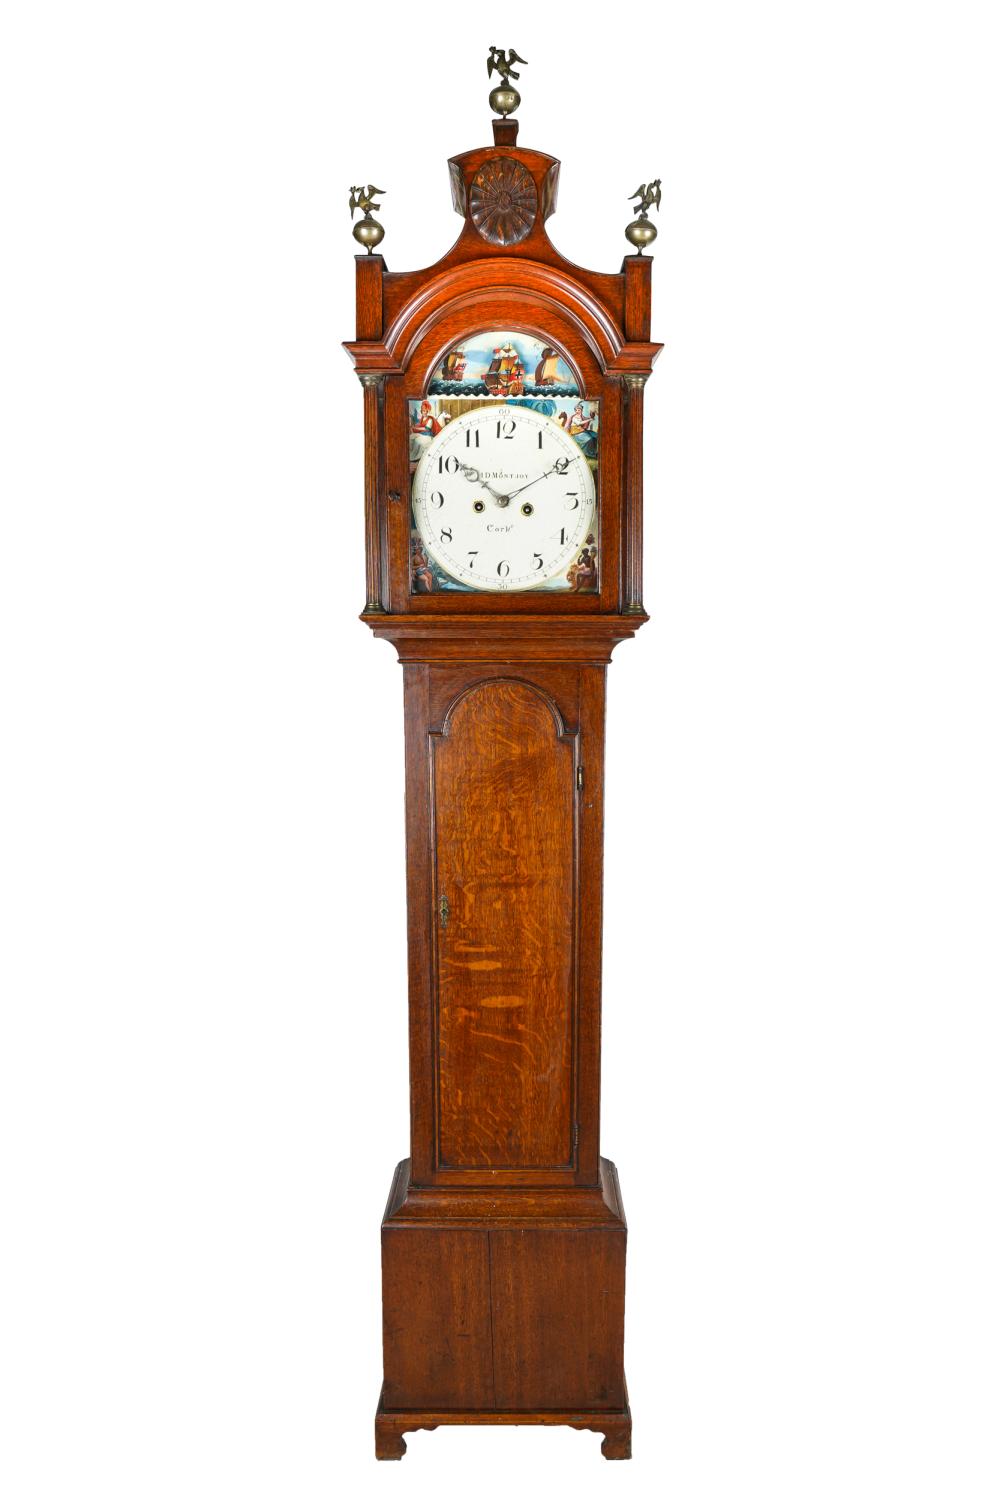 I D MONTJOY TALL CASE CLOCKwith 33261b